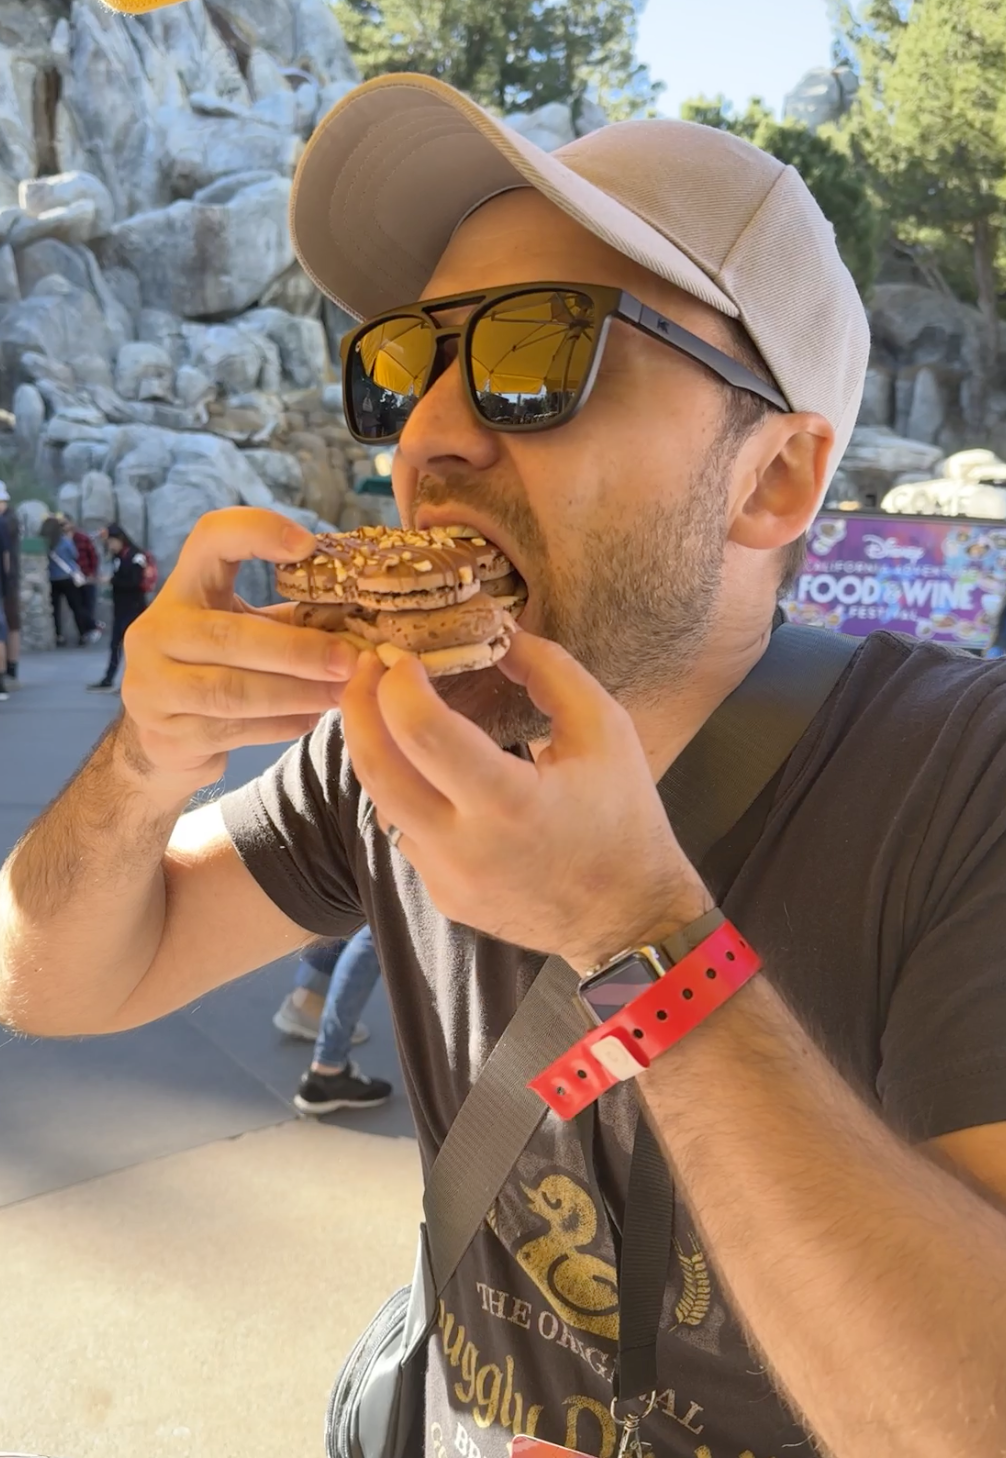 Man in sunglasses eats a large cookie at a theme park, surrounded by other visitors